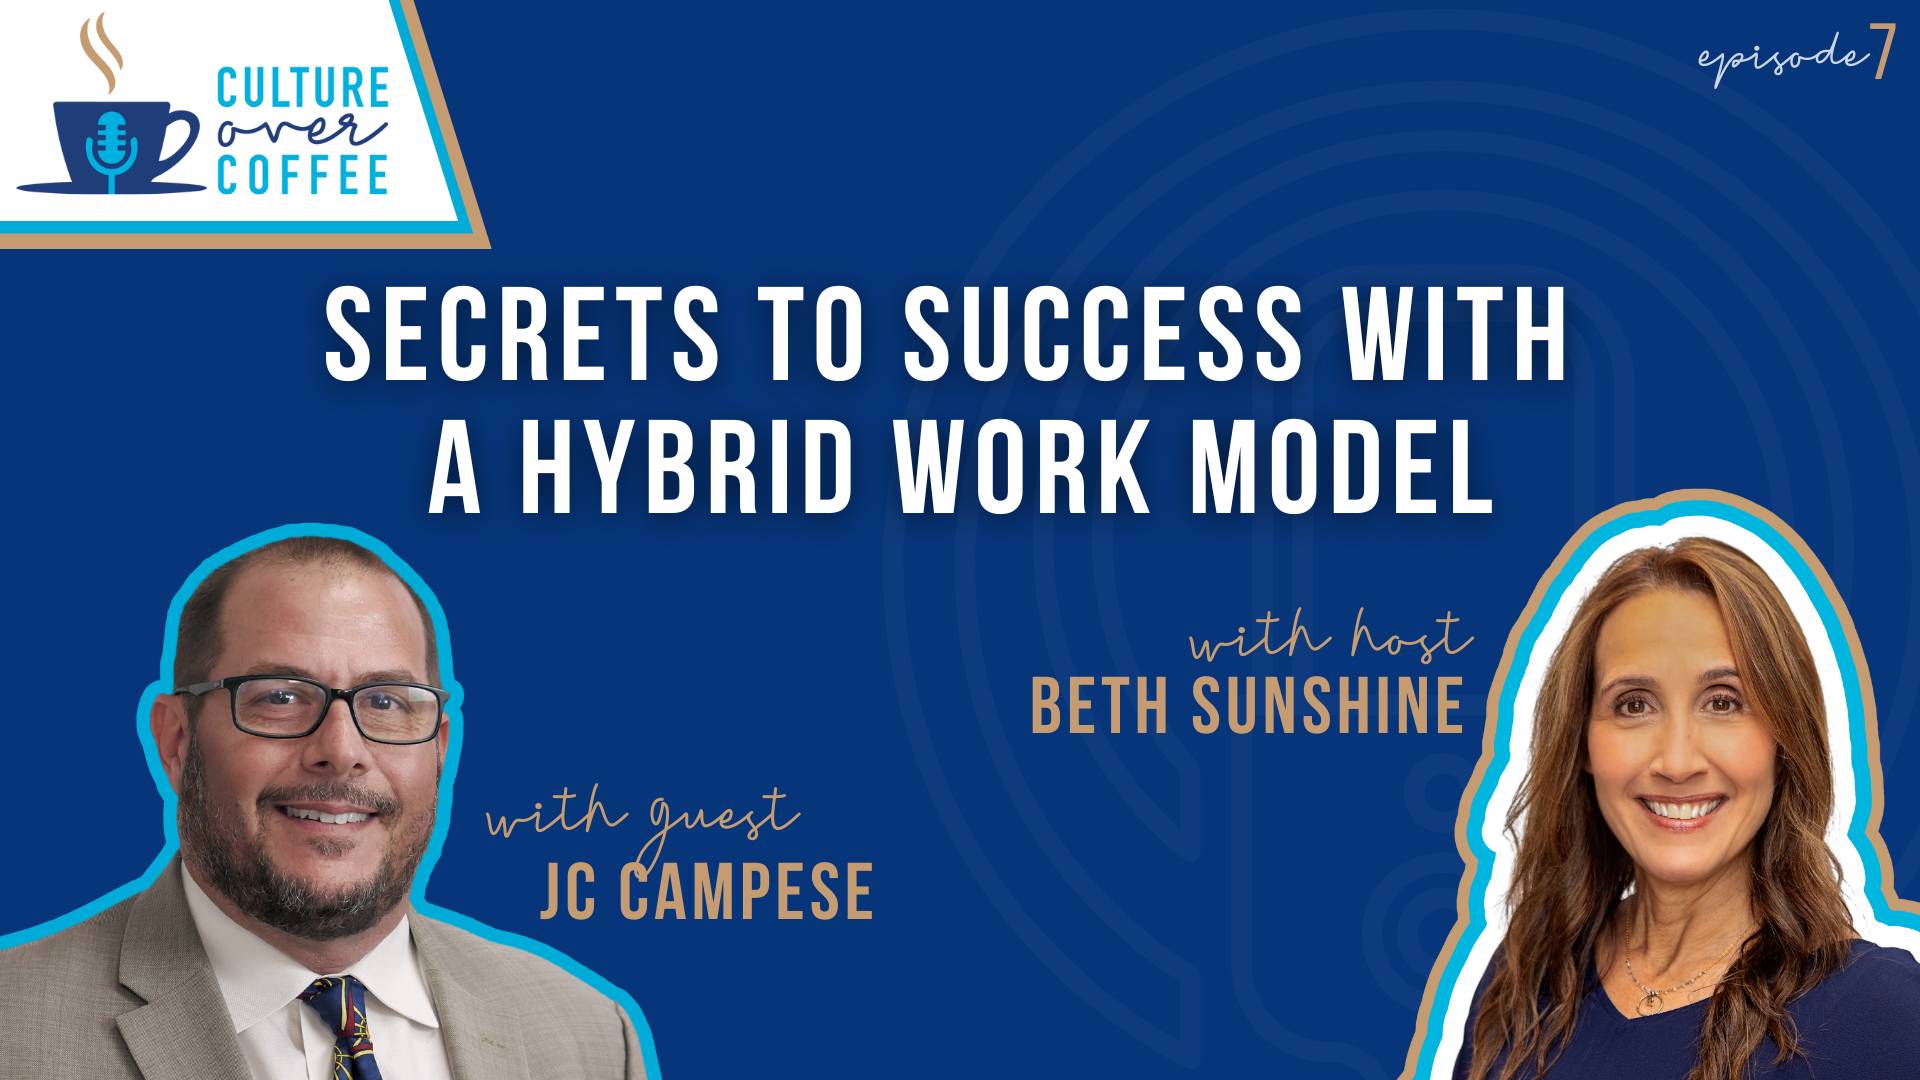 Culture over Coffee Podcast: Secrets to Success with a Hybrid Work Model